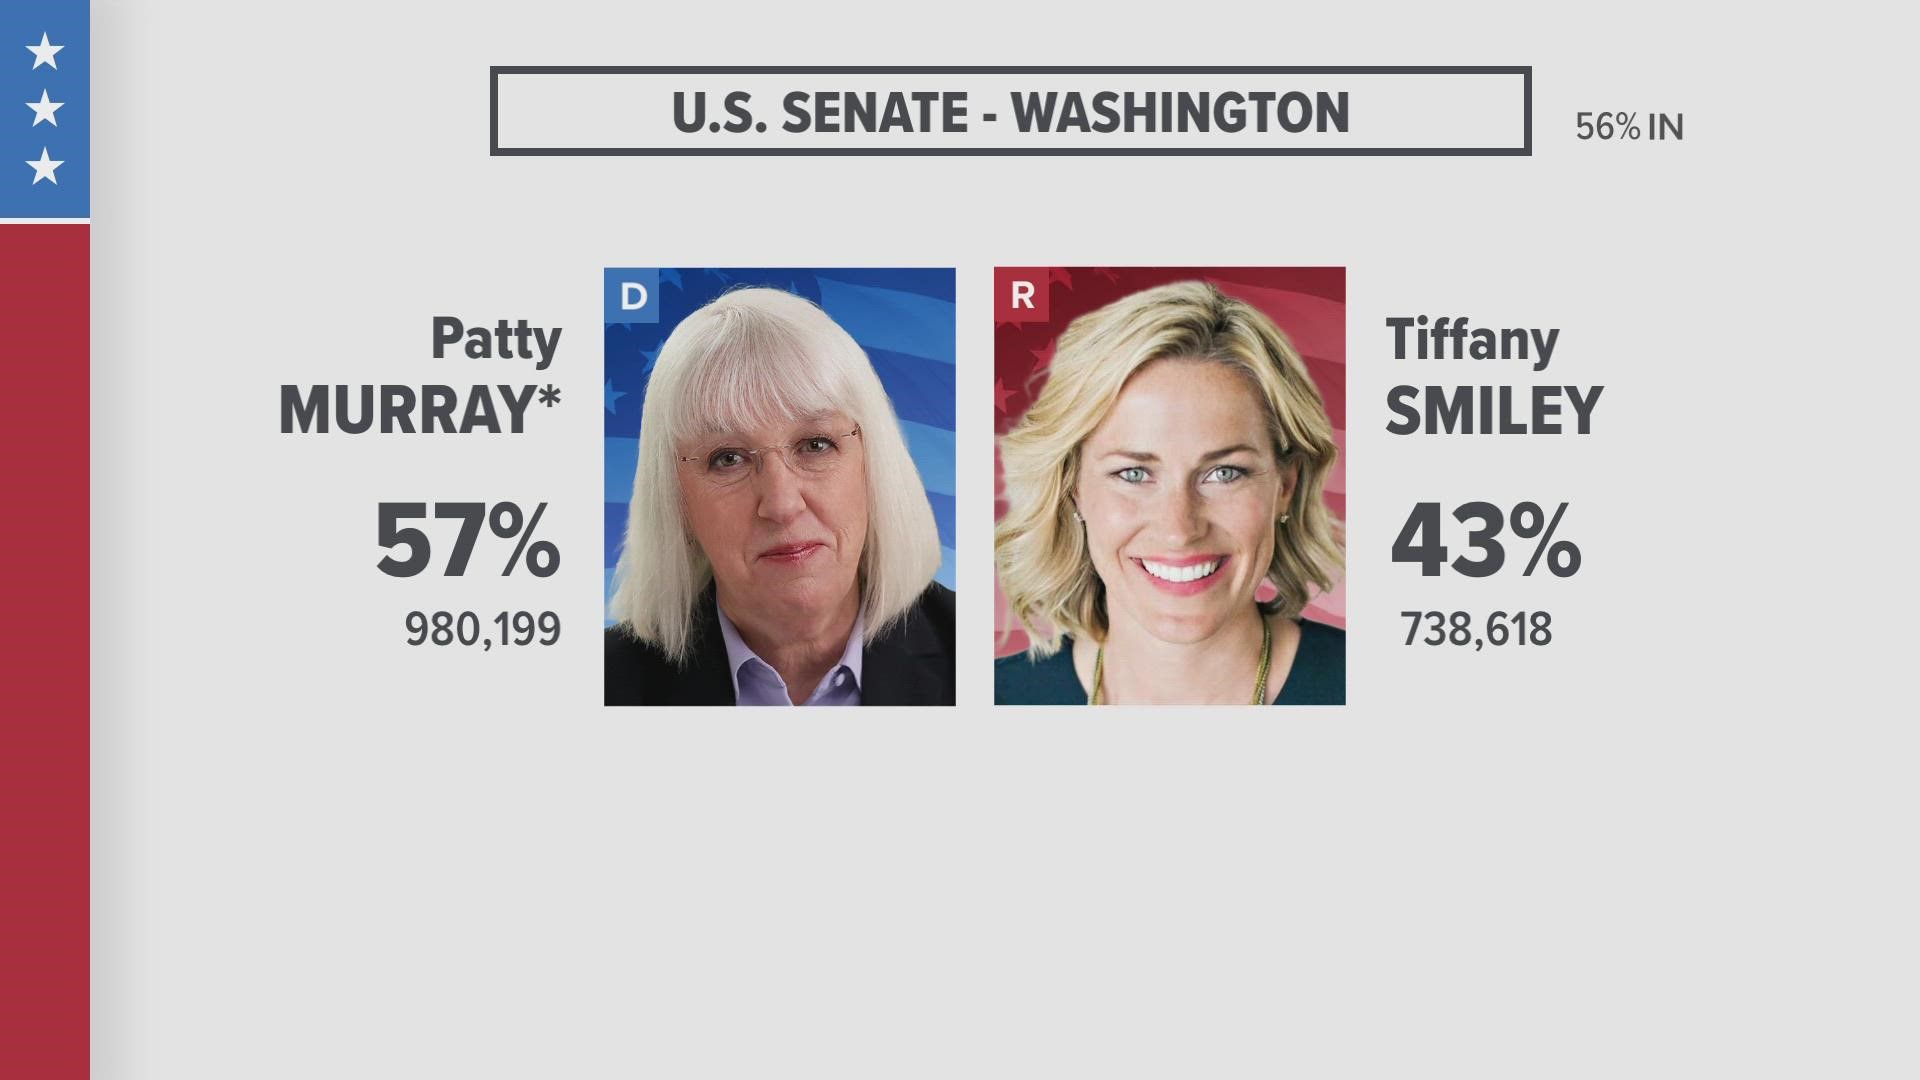 KING 5 is calling the US Senate race for Incumbent Patty Murray over Republican challenger Tiffany Smiley.